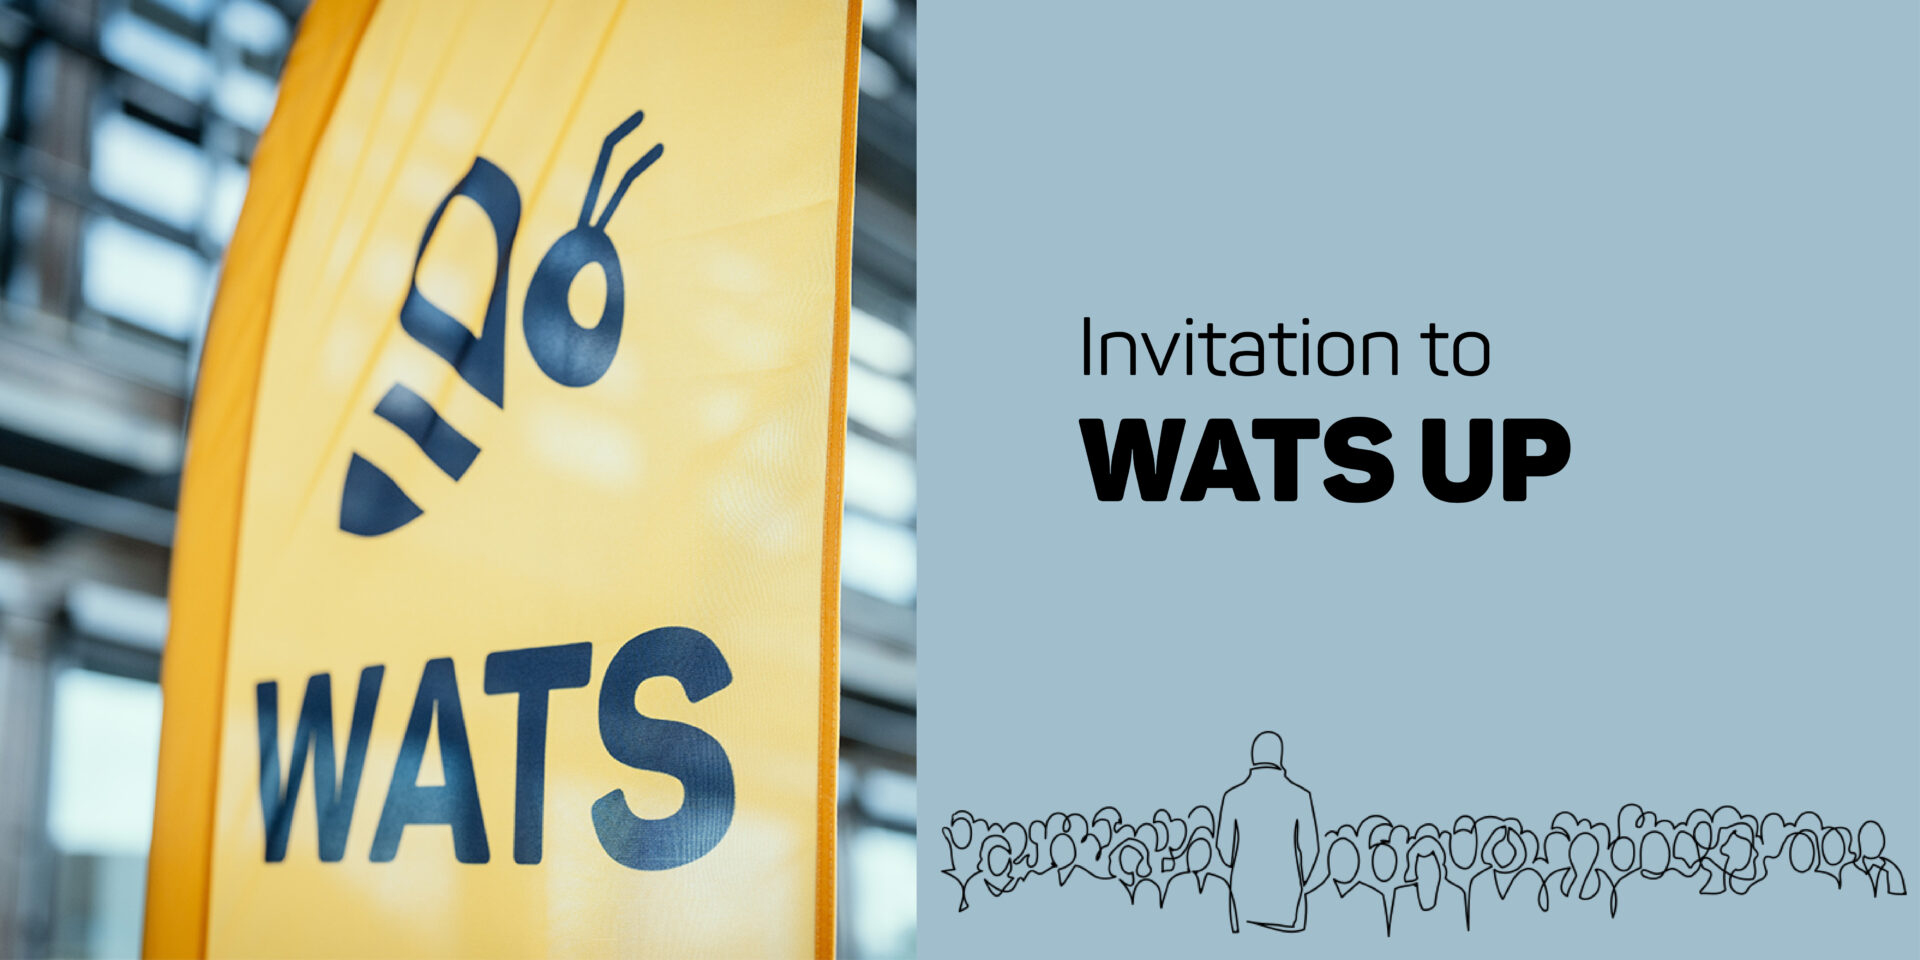 Save the date! Join us at WATS UP, a one-day event dedicated to Test Data Management.